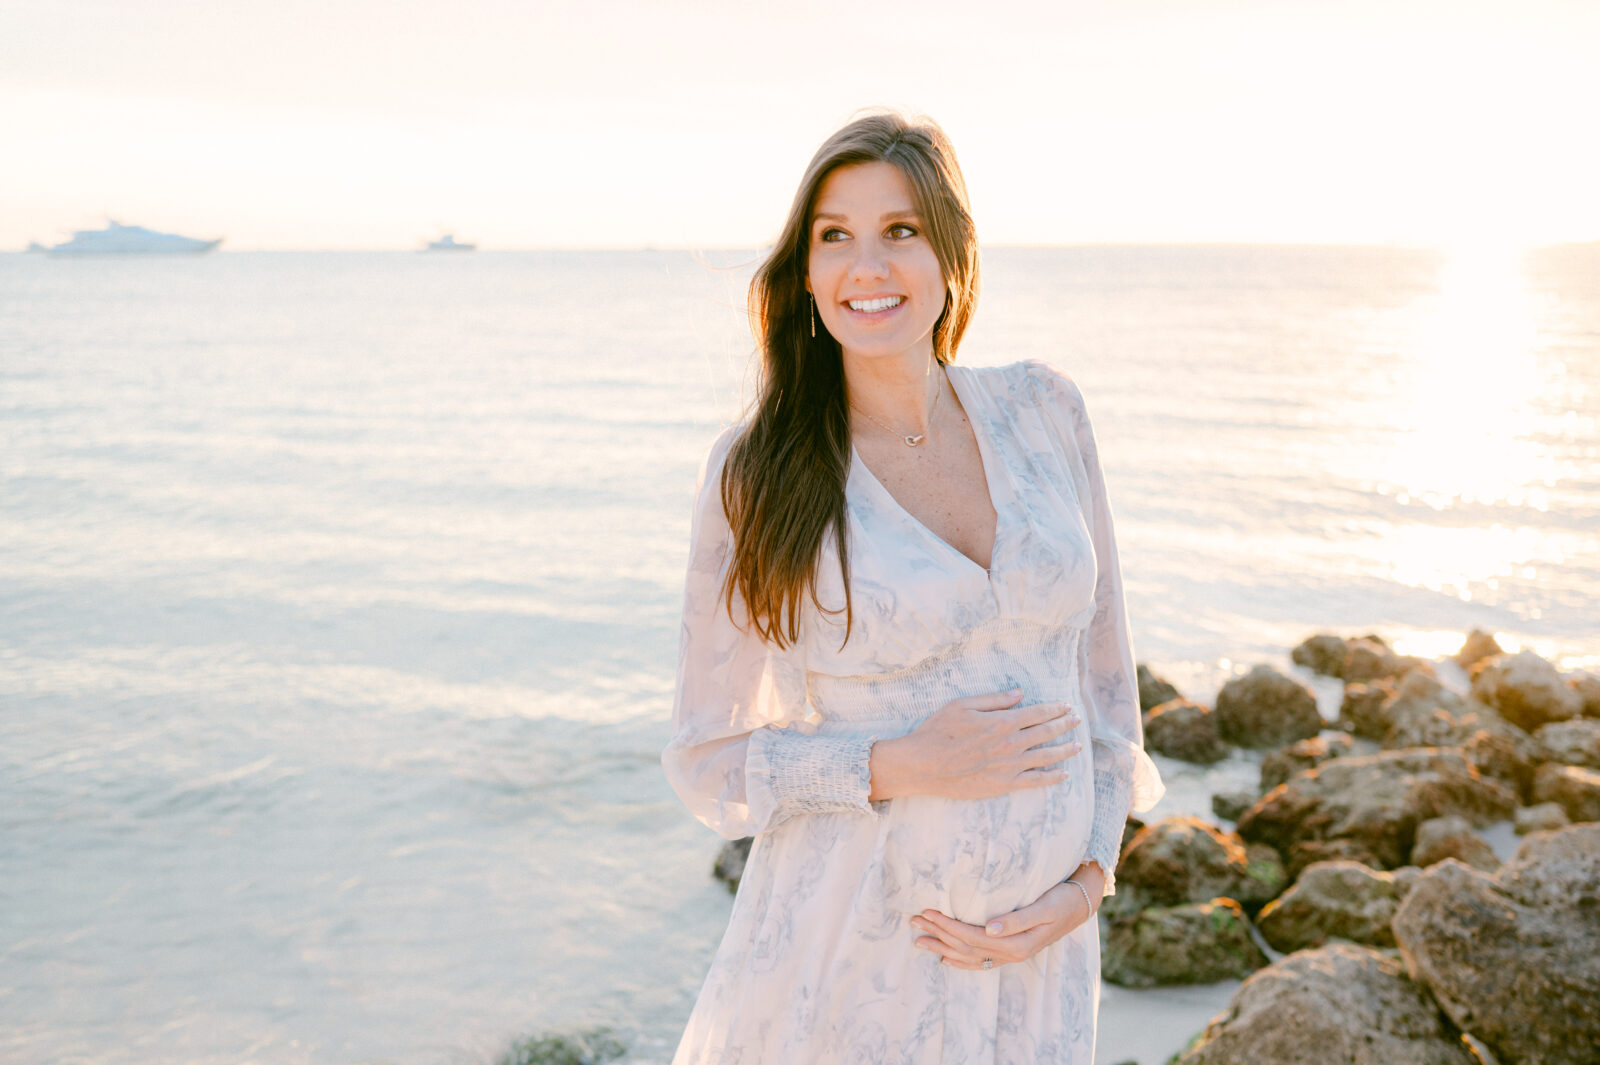 Pregnancy photos on the beach during sunset 